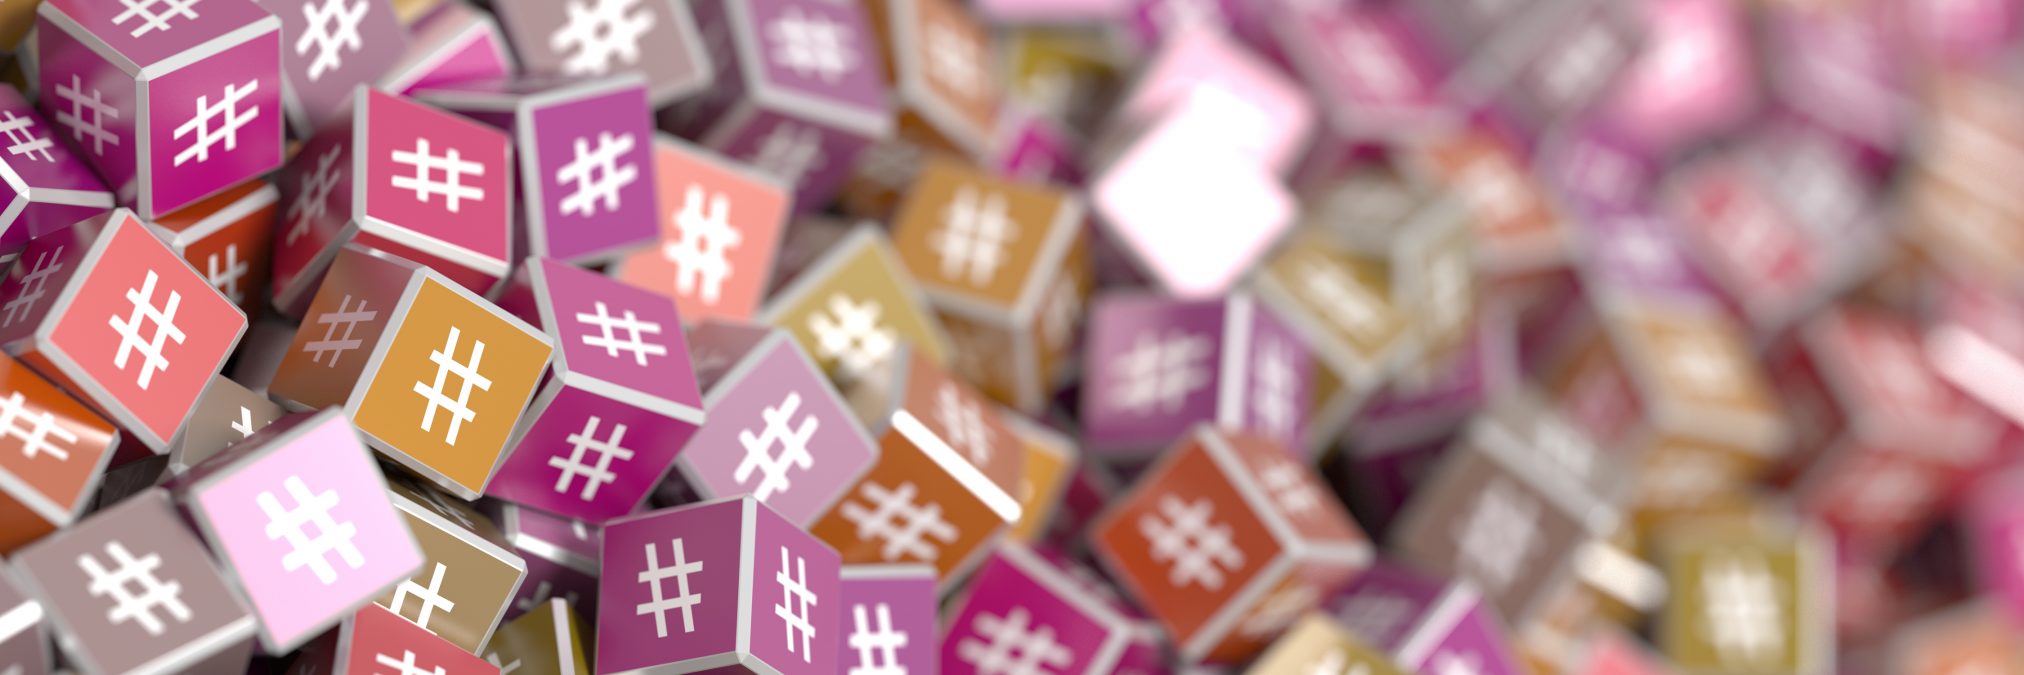 twitter hashtags on cubes social media concept